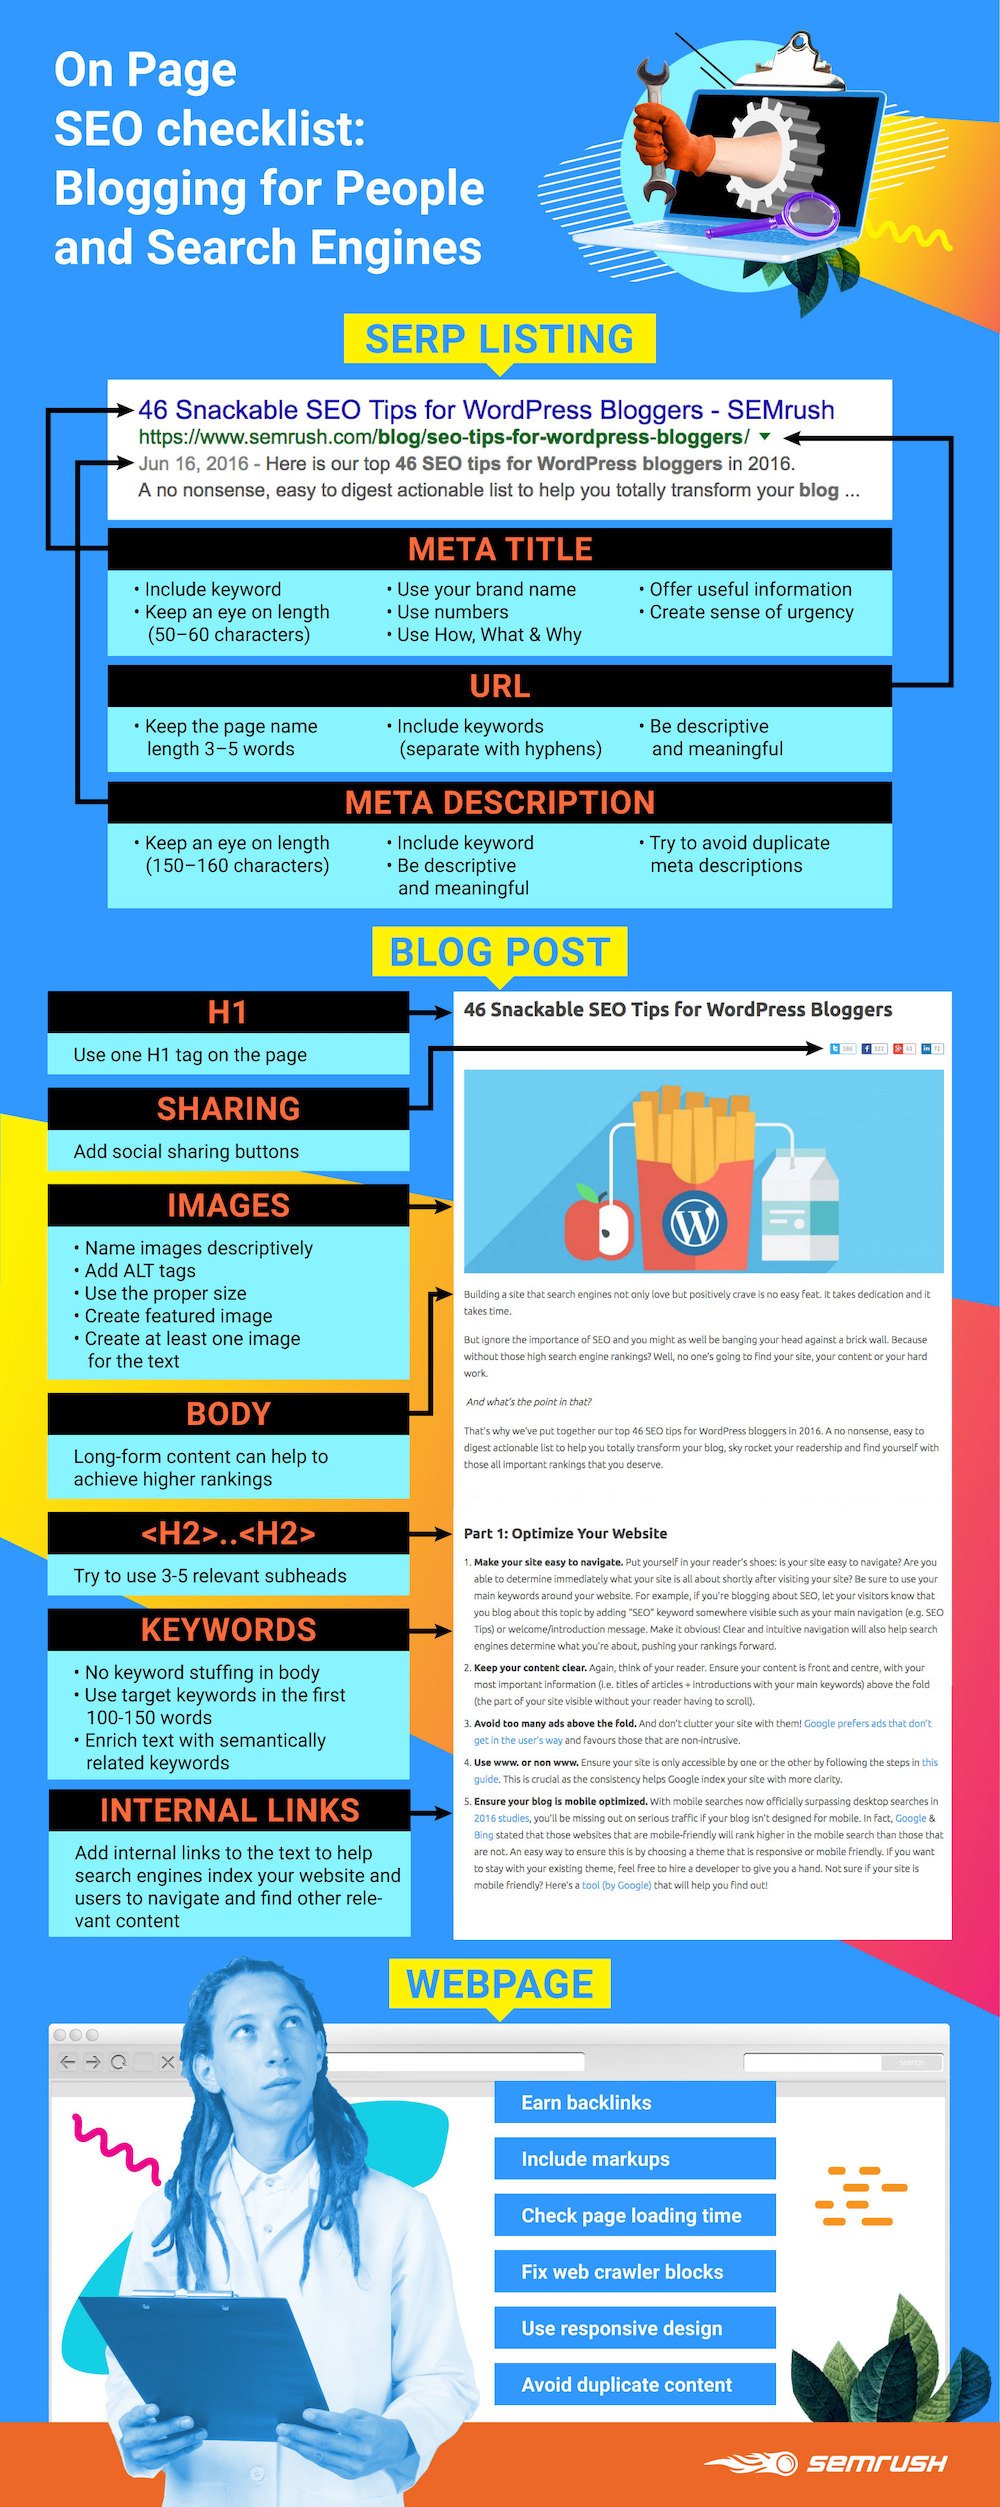 infographic showing all the steps for on-page SEO